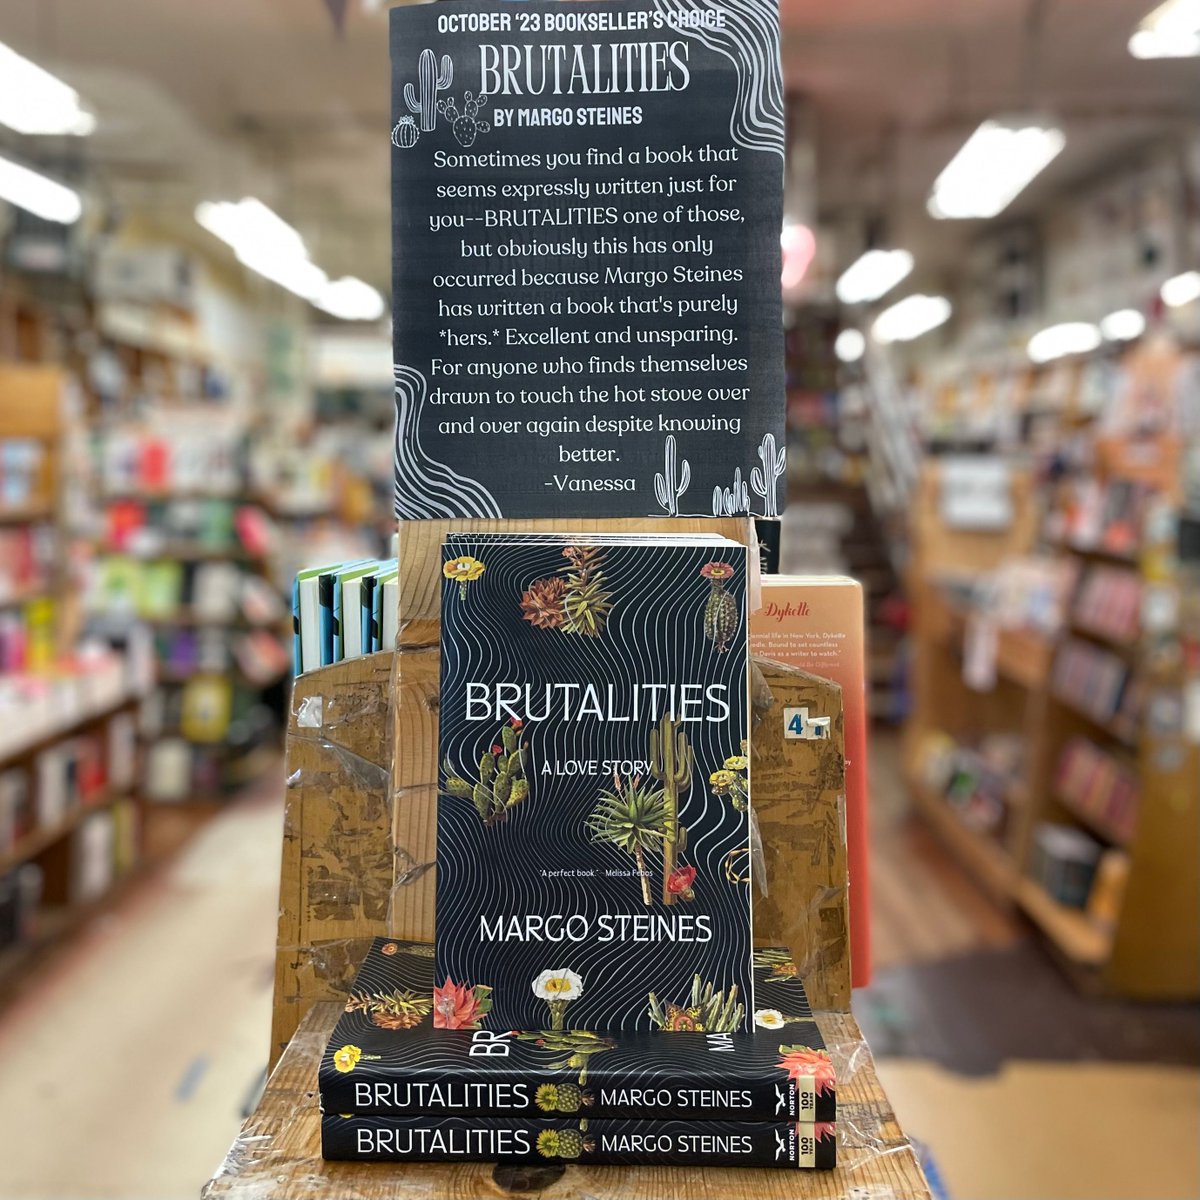 Happy October! We have a new bookseller's choice: Brutalities by Margo Steines @margosteines. 'For anyone who finds themselves drawn to touch the hot stove over and over again despite knowing better.'